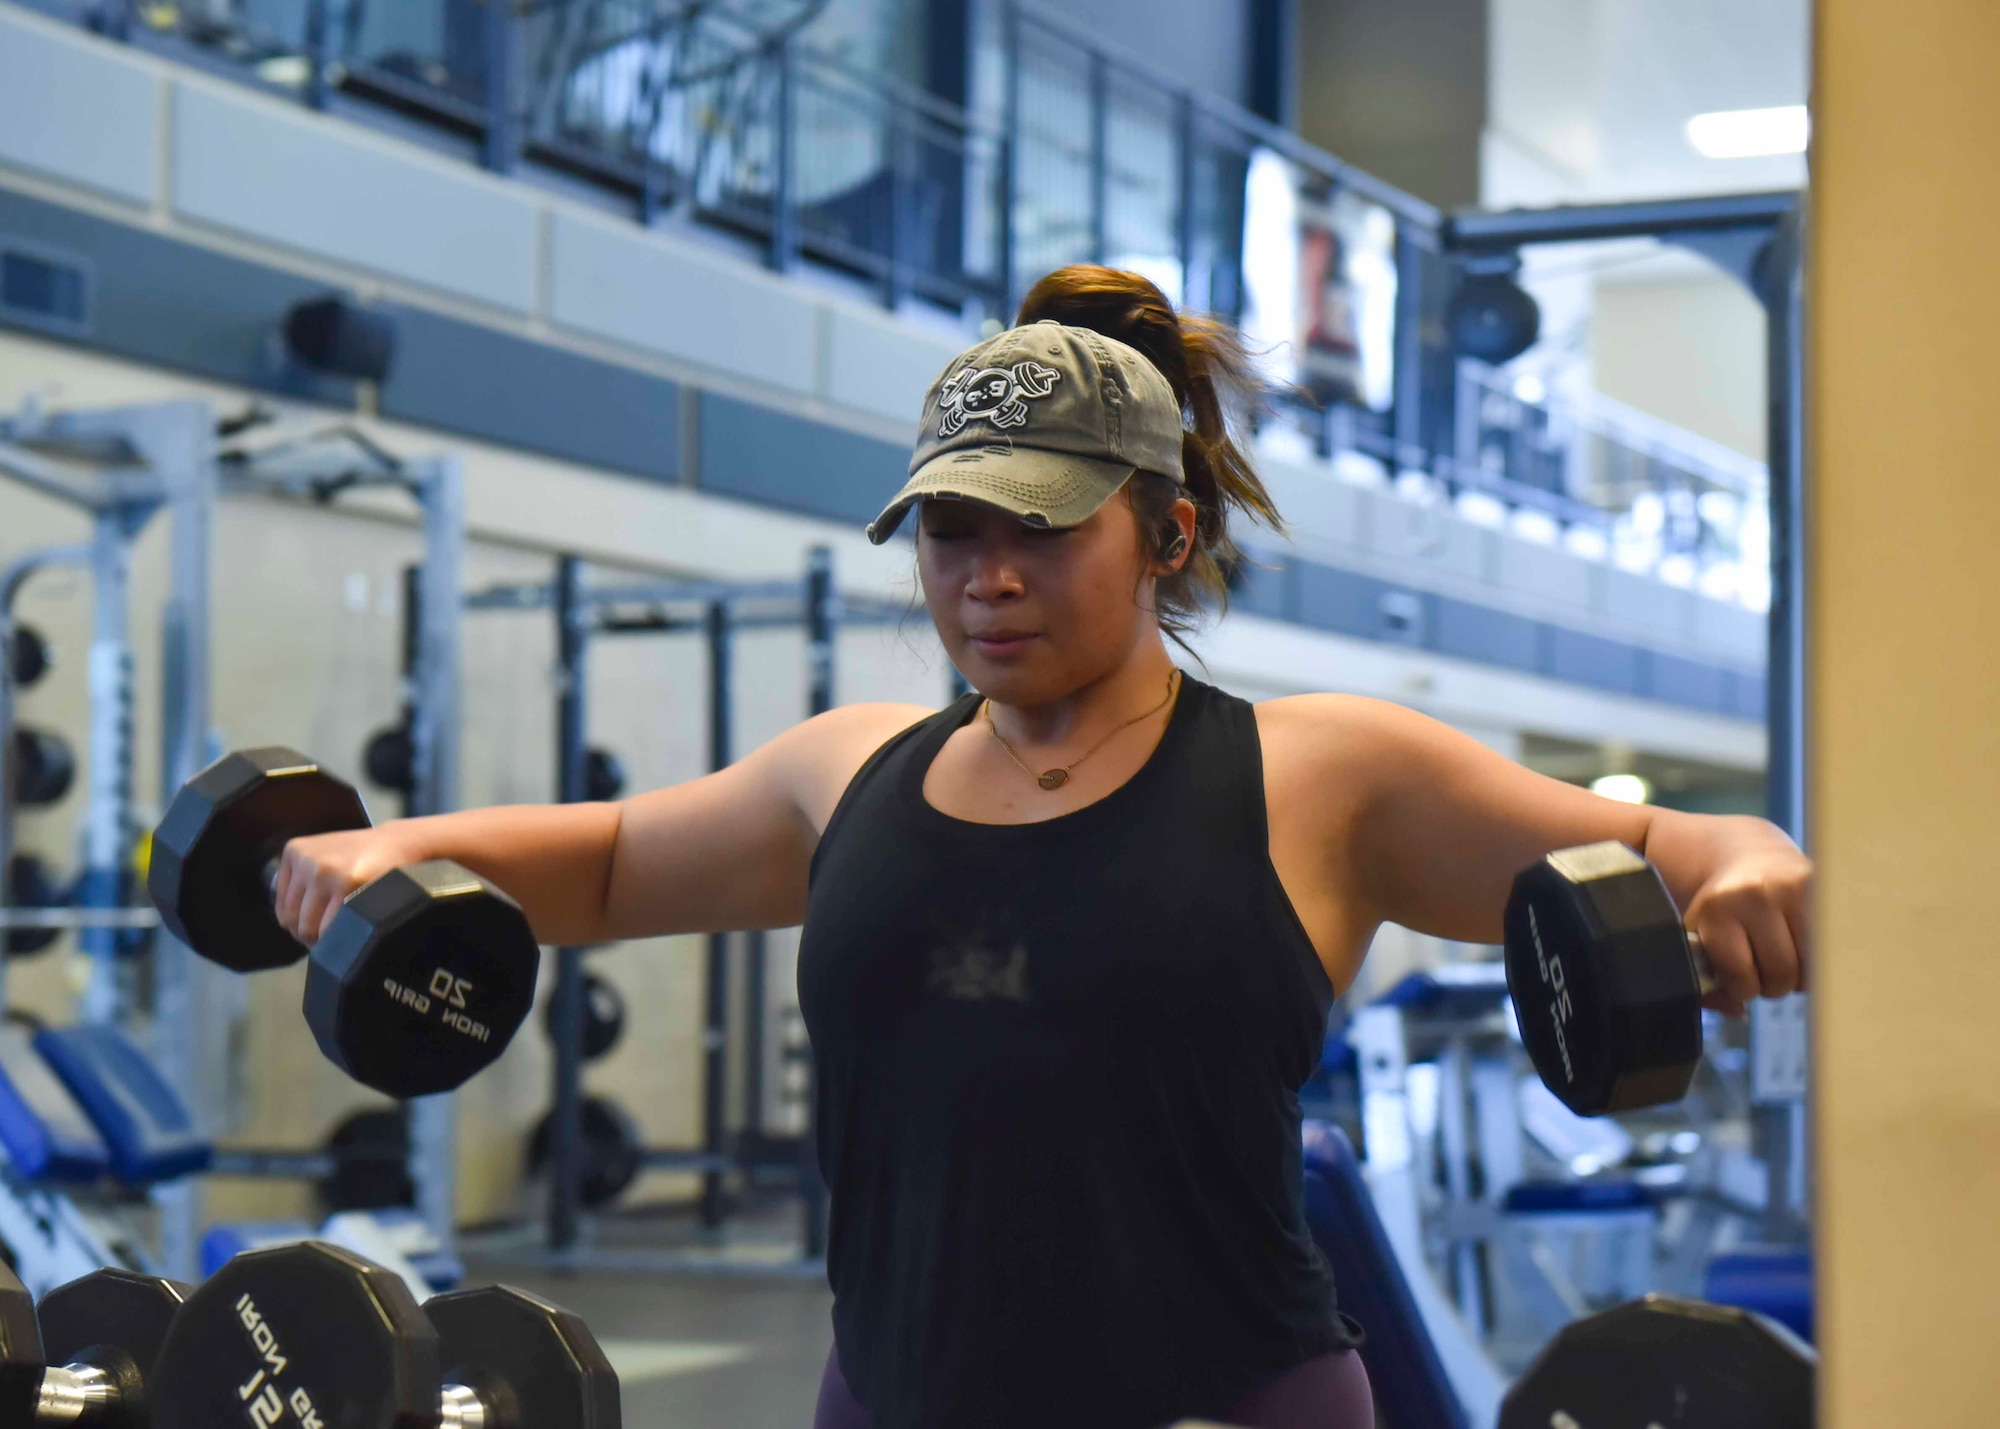 U.S. Air Force Staff Sgt. Samantha Acevedo, 92nd Force Support Squadron fitness assessment cell manager, does a workout in the Fairchild Air Force Base fitness center, June 29, 2020. Physical fitness is important for all Airmen, especially with upcoming physical fitness tests. (U.S. Air Force photo by Airman 1st Class Kiaundra Miller)